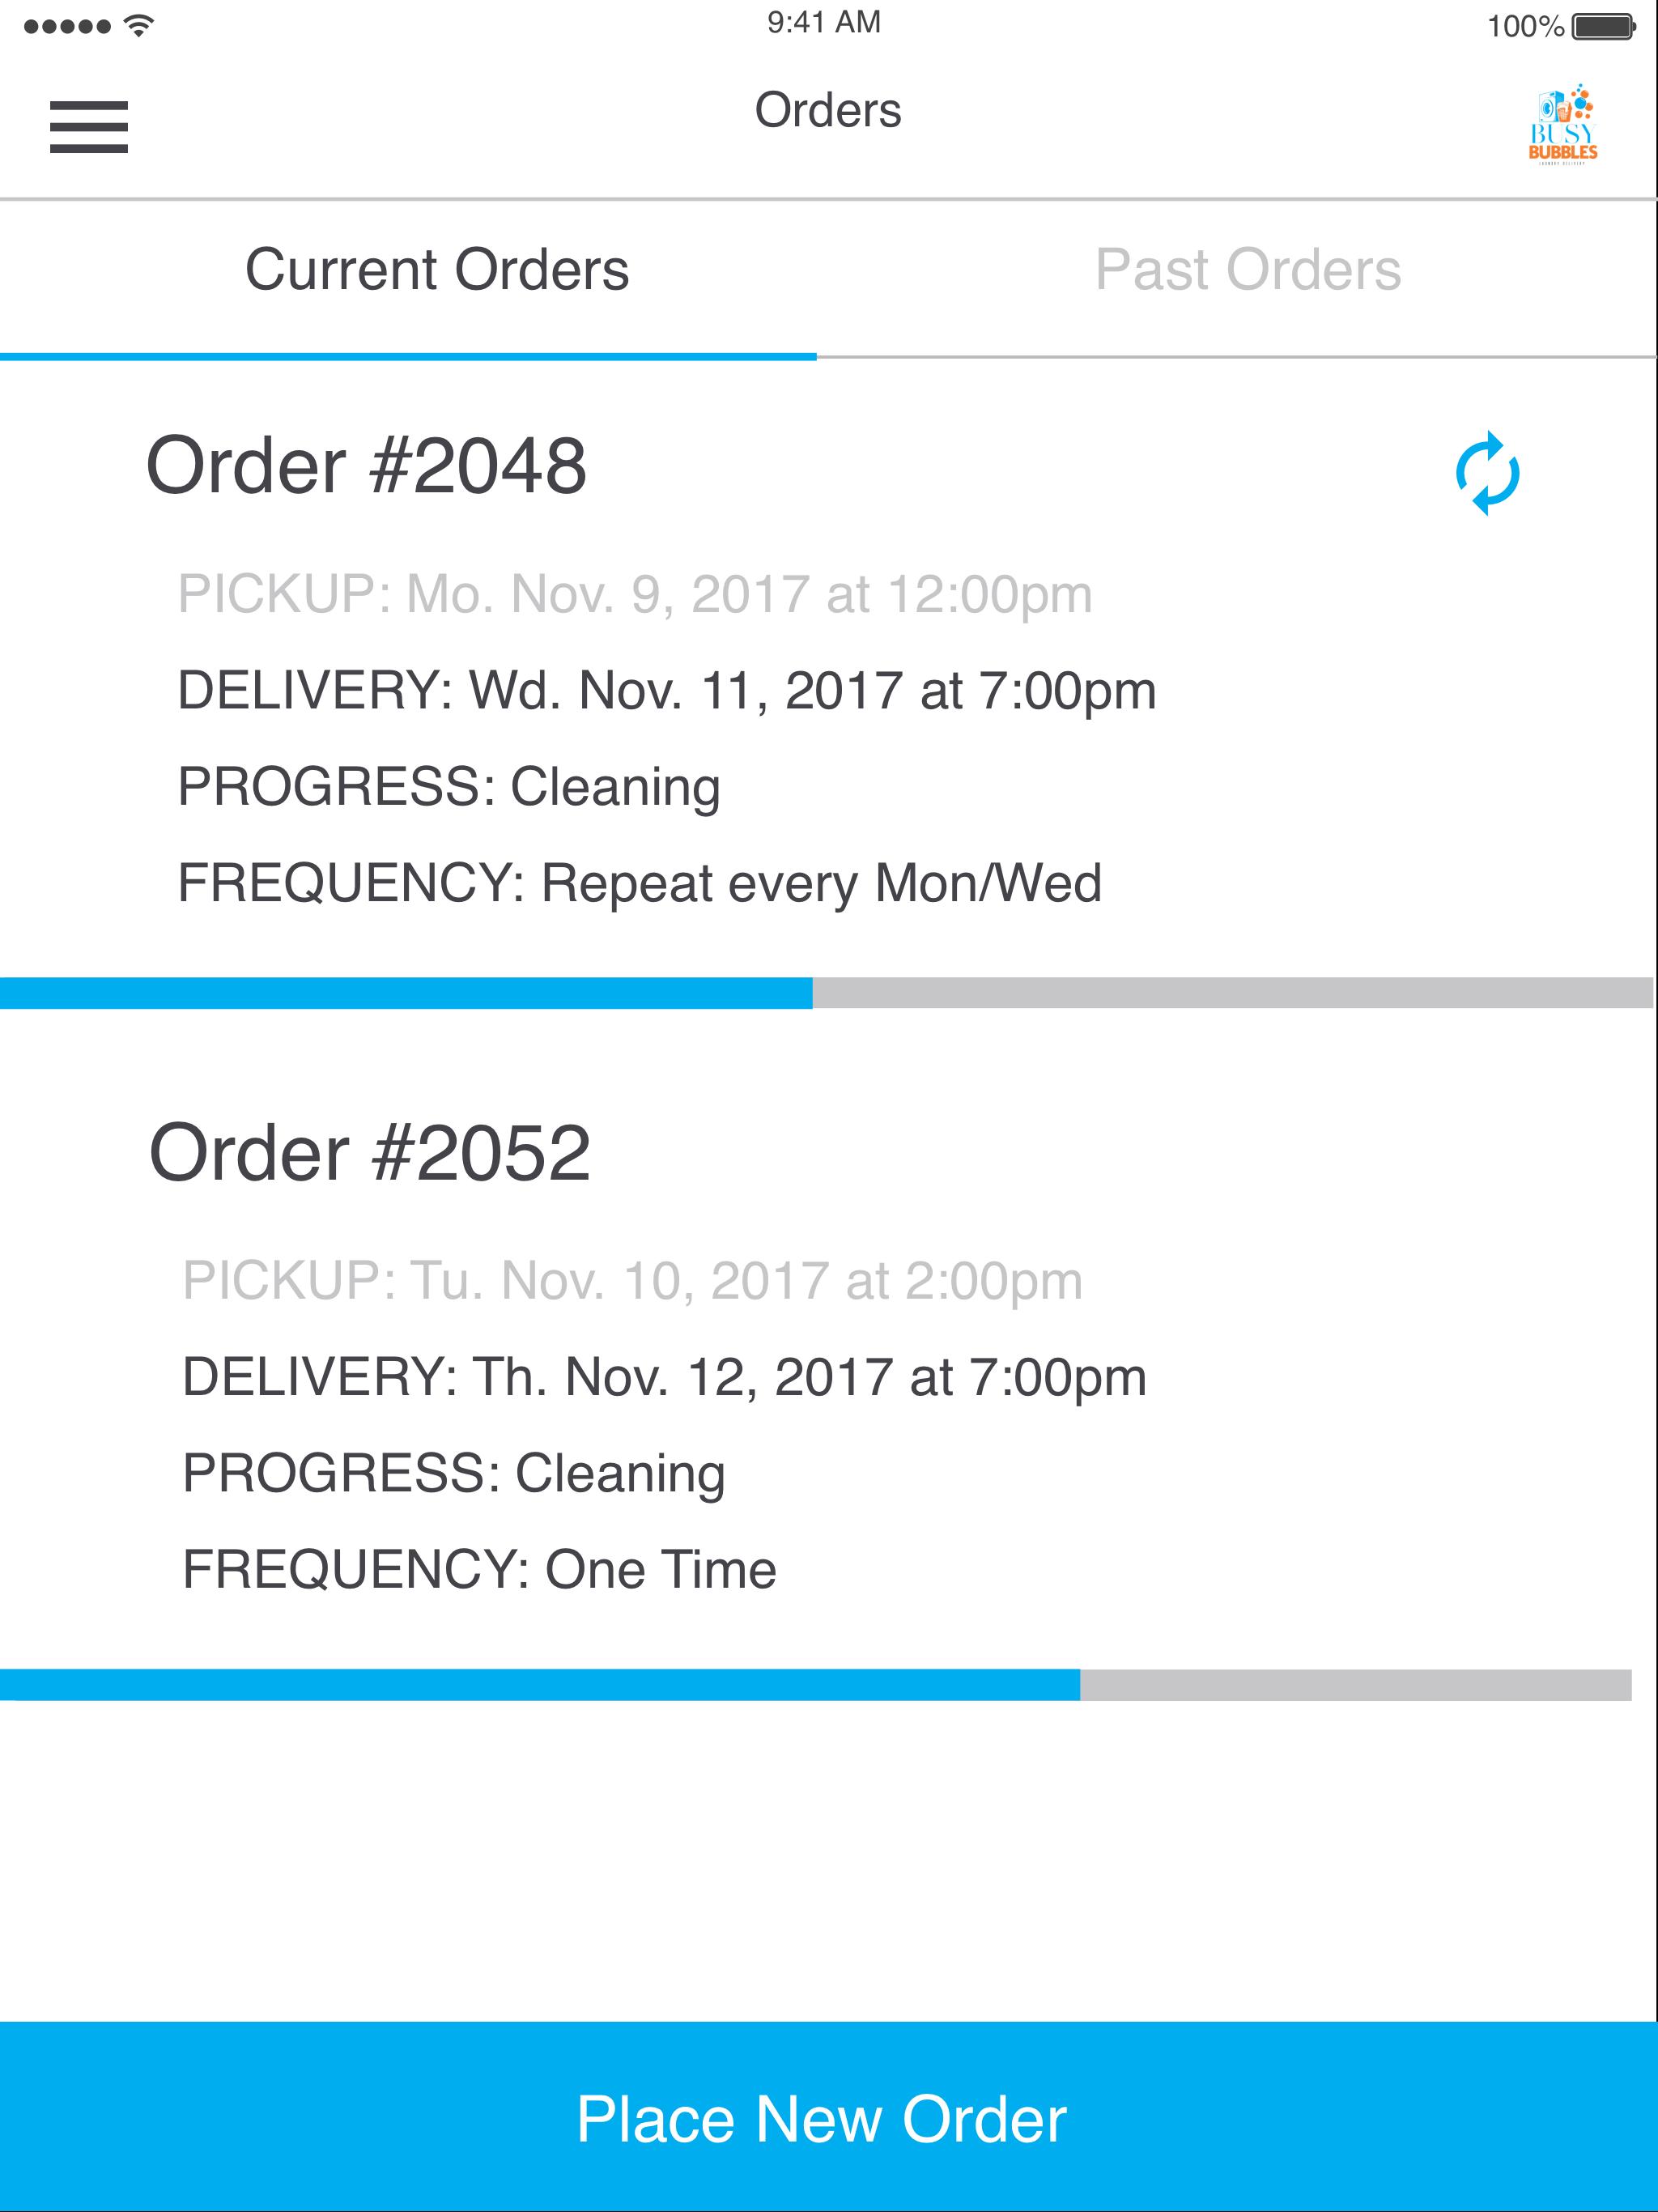 Current orders